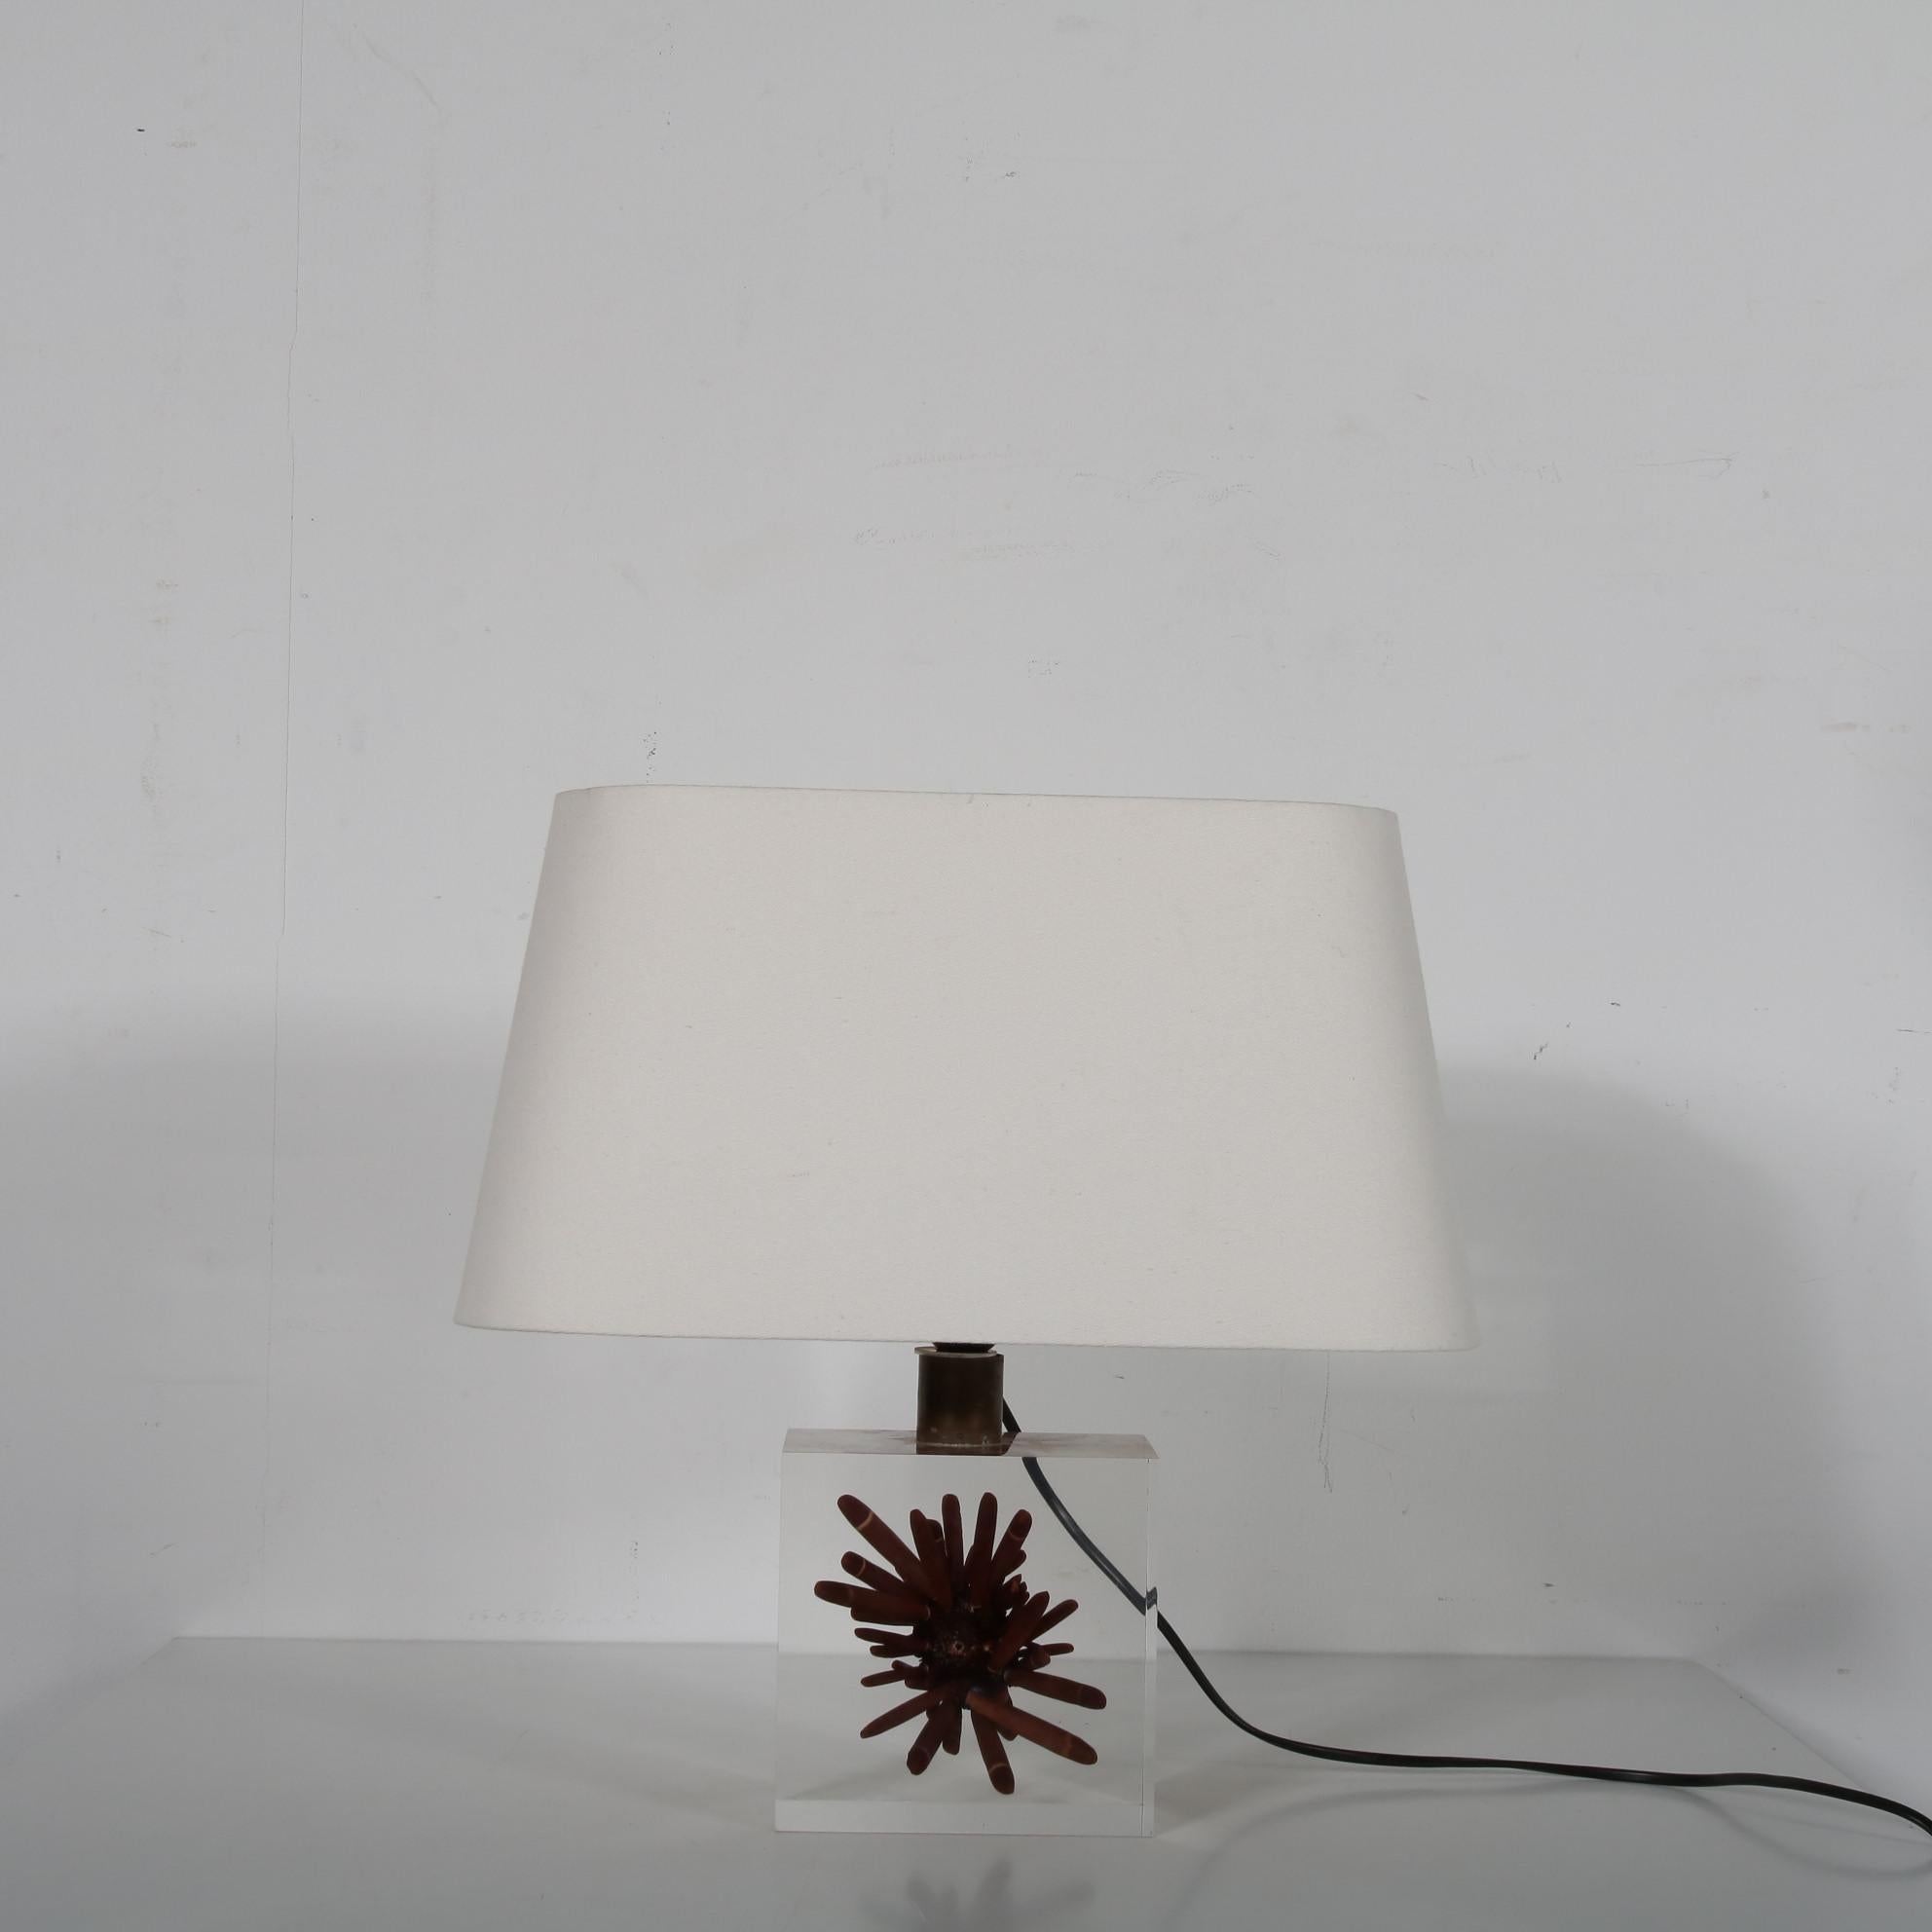 A luxurious table lamp by French designer Pierre Giraudon, manufactured in France around 1970.

The eye-catching feature of this piece is that it has a square clear resin base which holds a brown piece of coral. The cube is completely clear, which